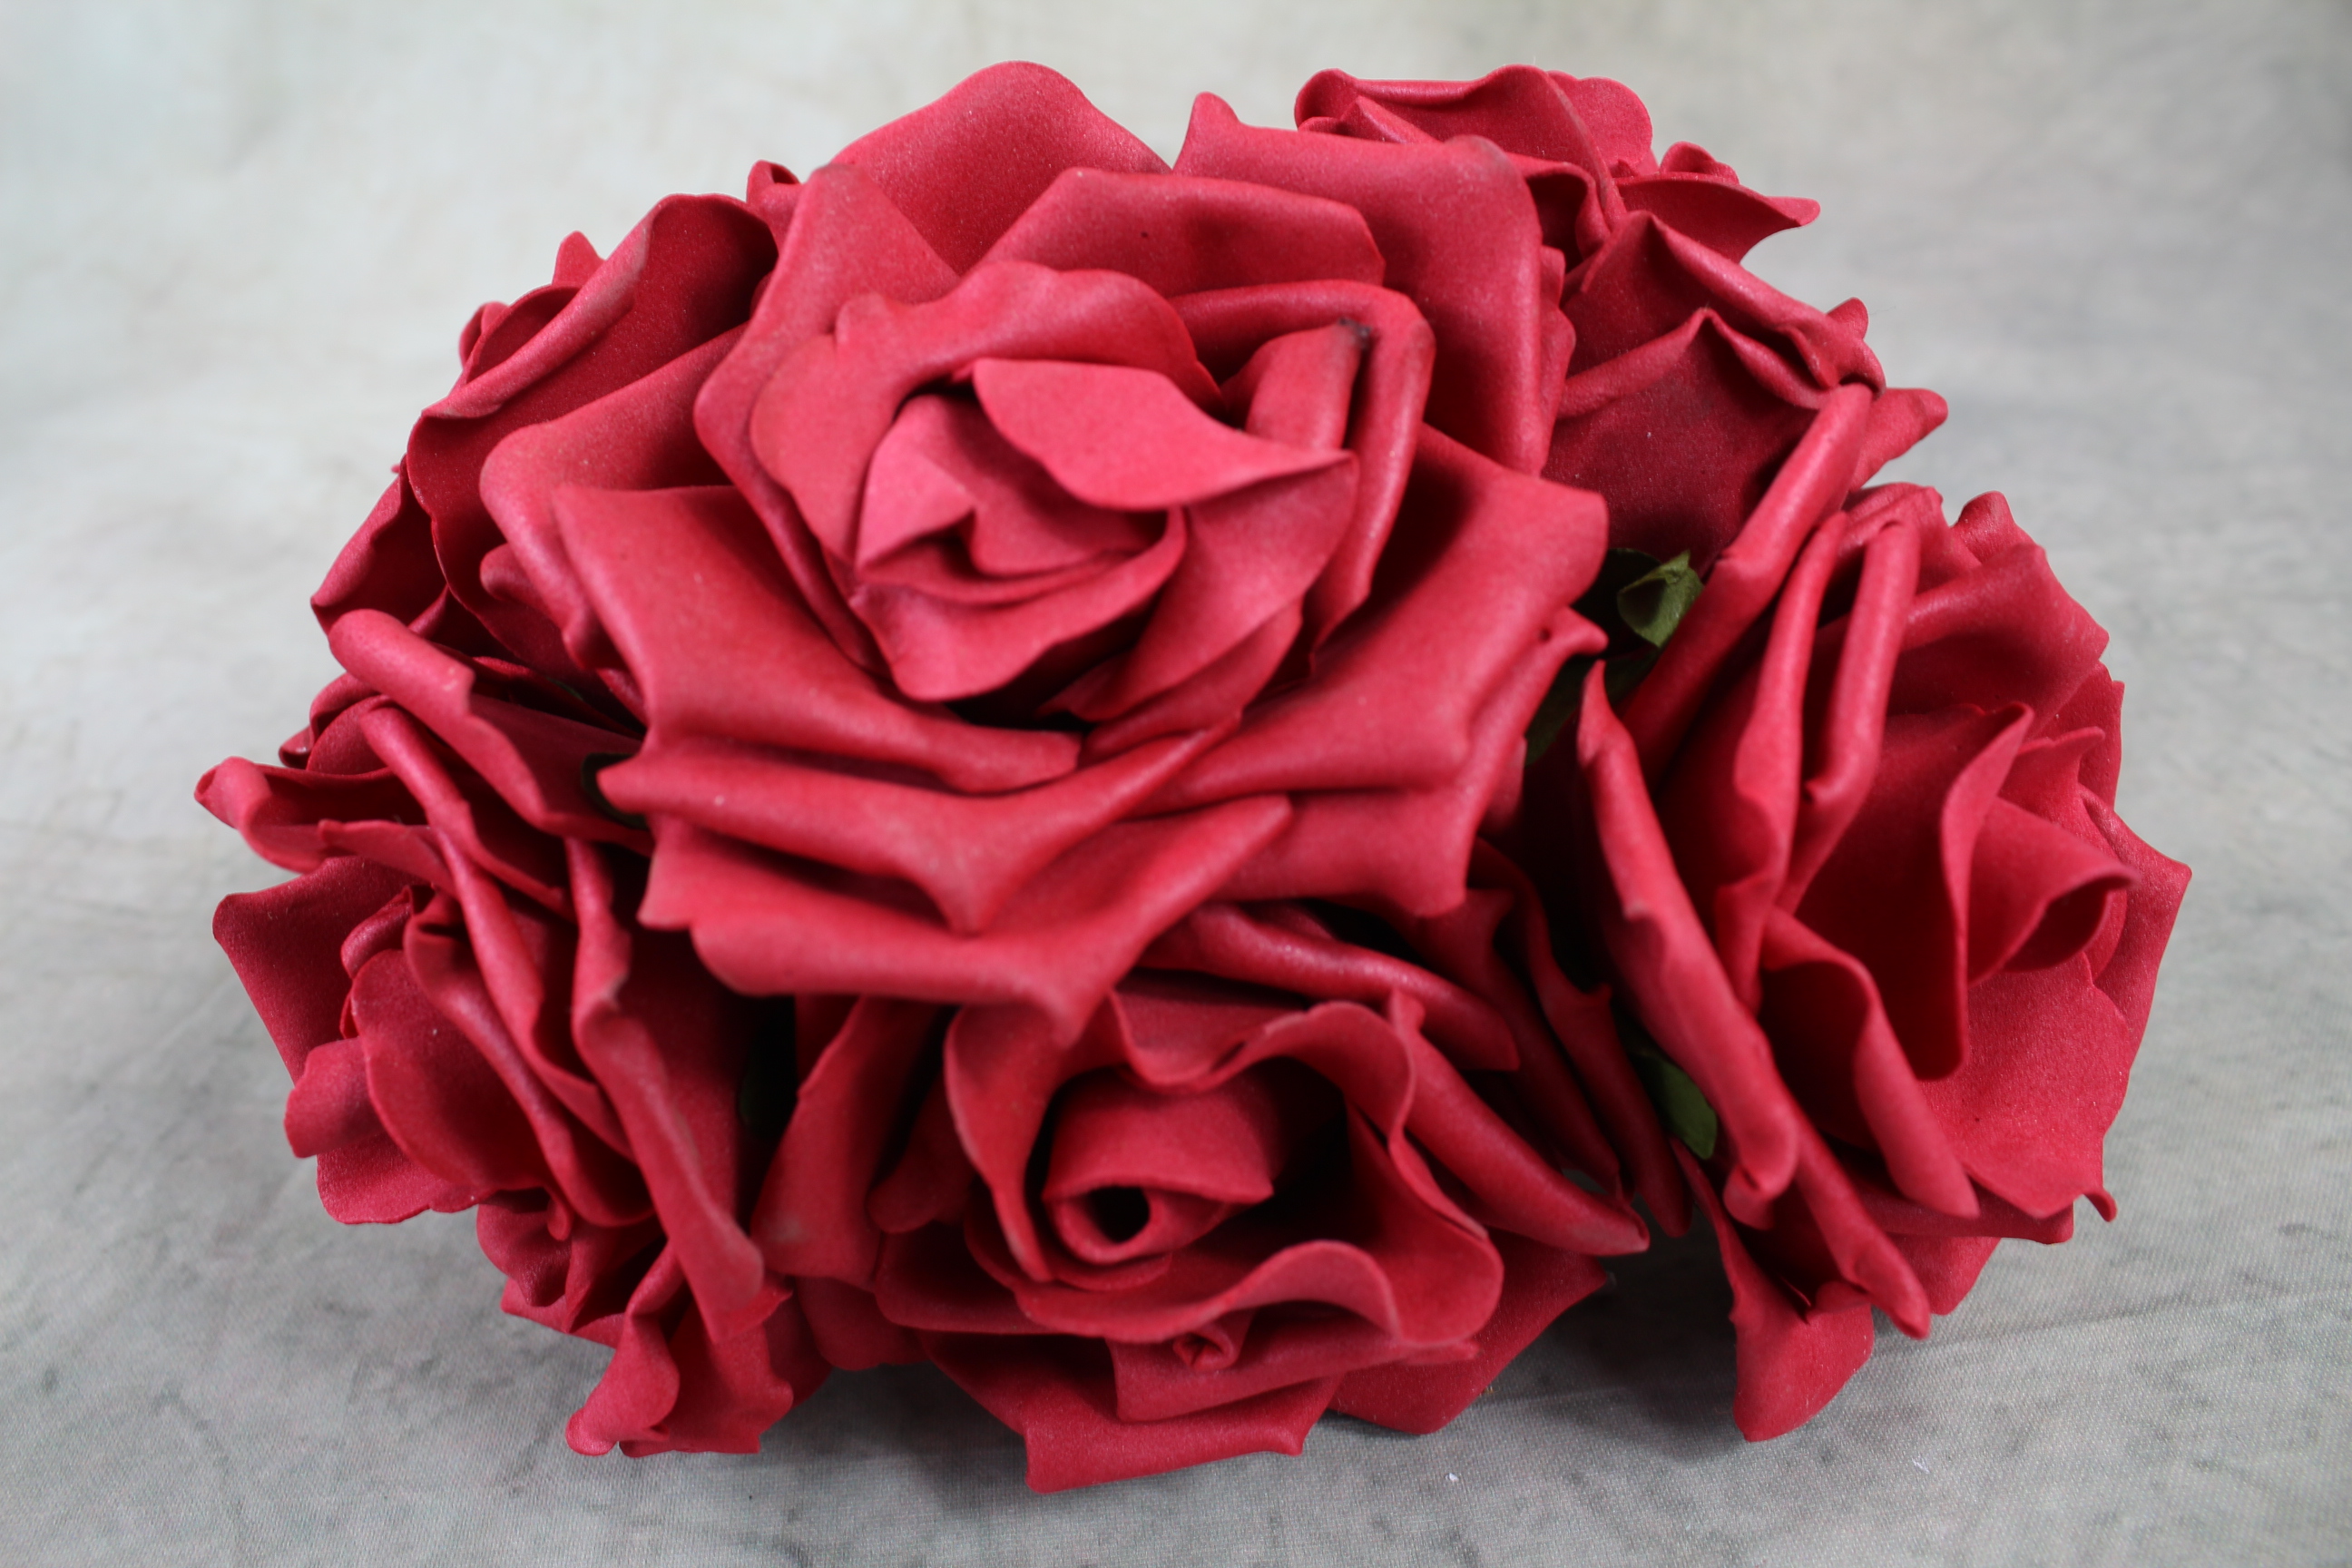 12 x 9cm Colourfast Curly Foam Roses